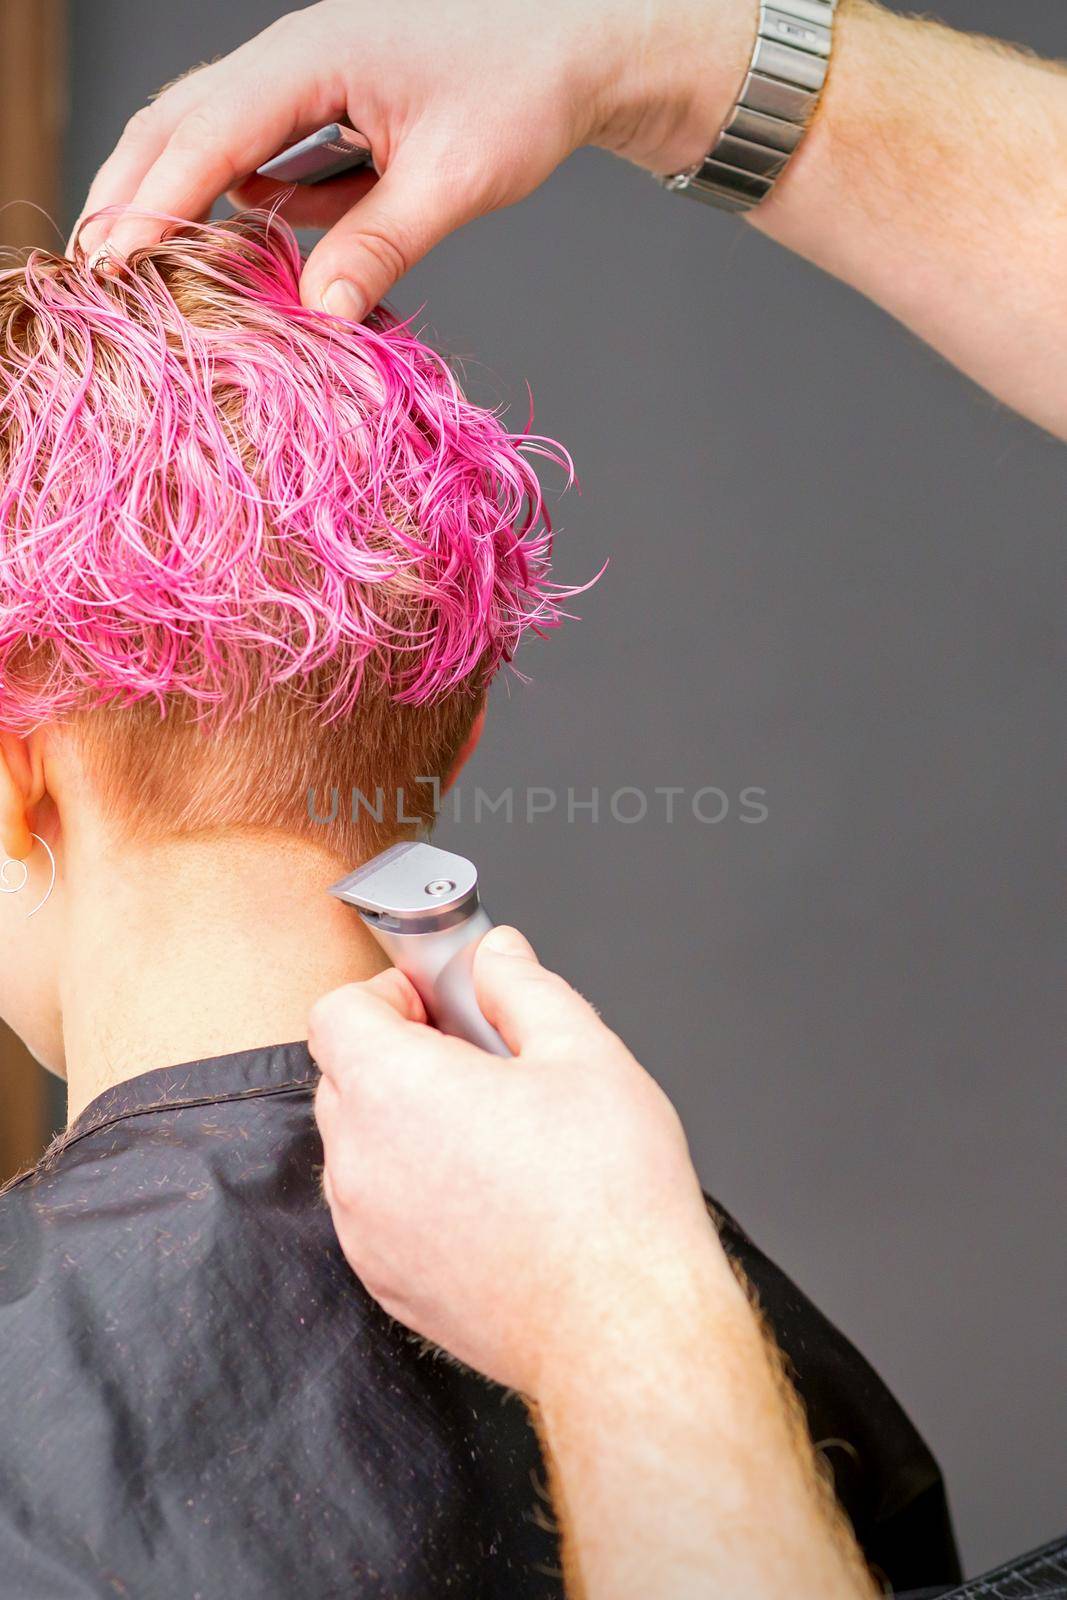 Male hairdresser shaves neck of a young caucasian woman with a short pink hairstyle by electric shaver in a hairdresser salon, close up. by okskukuruza